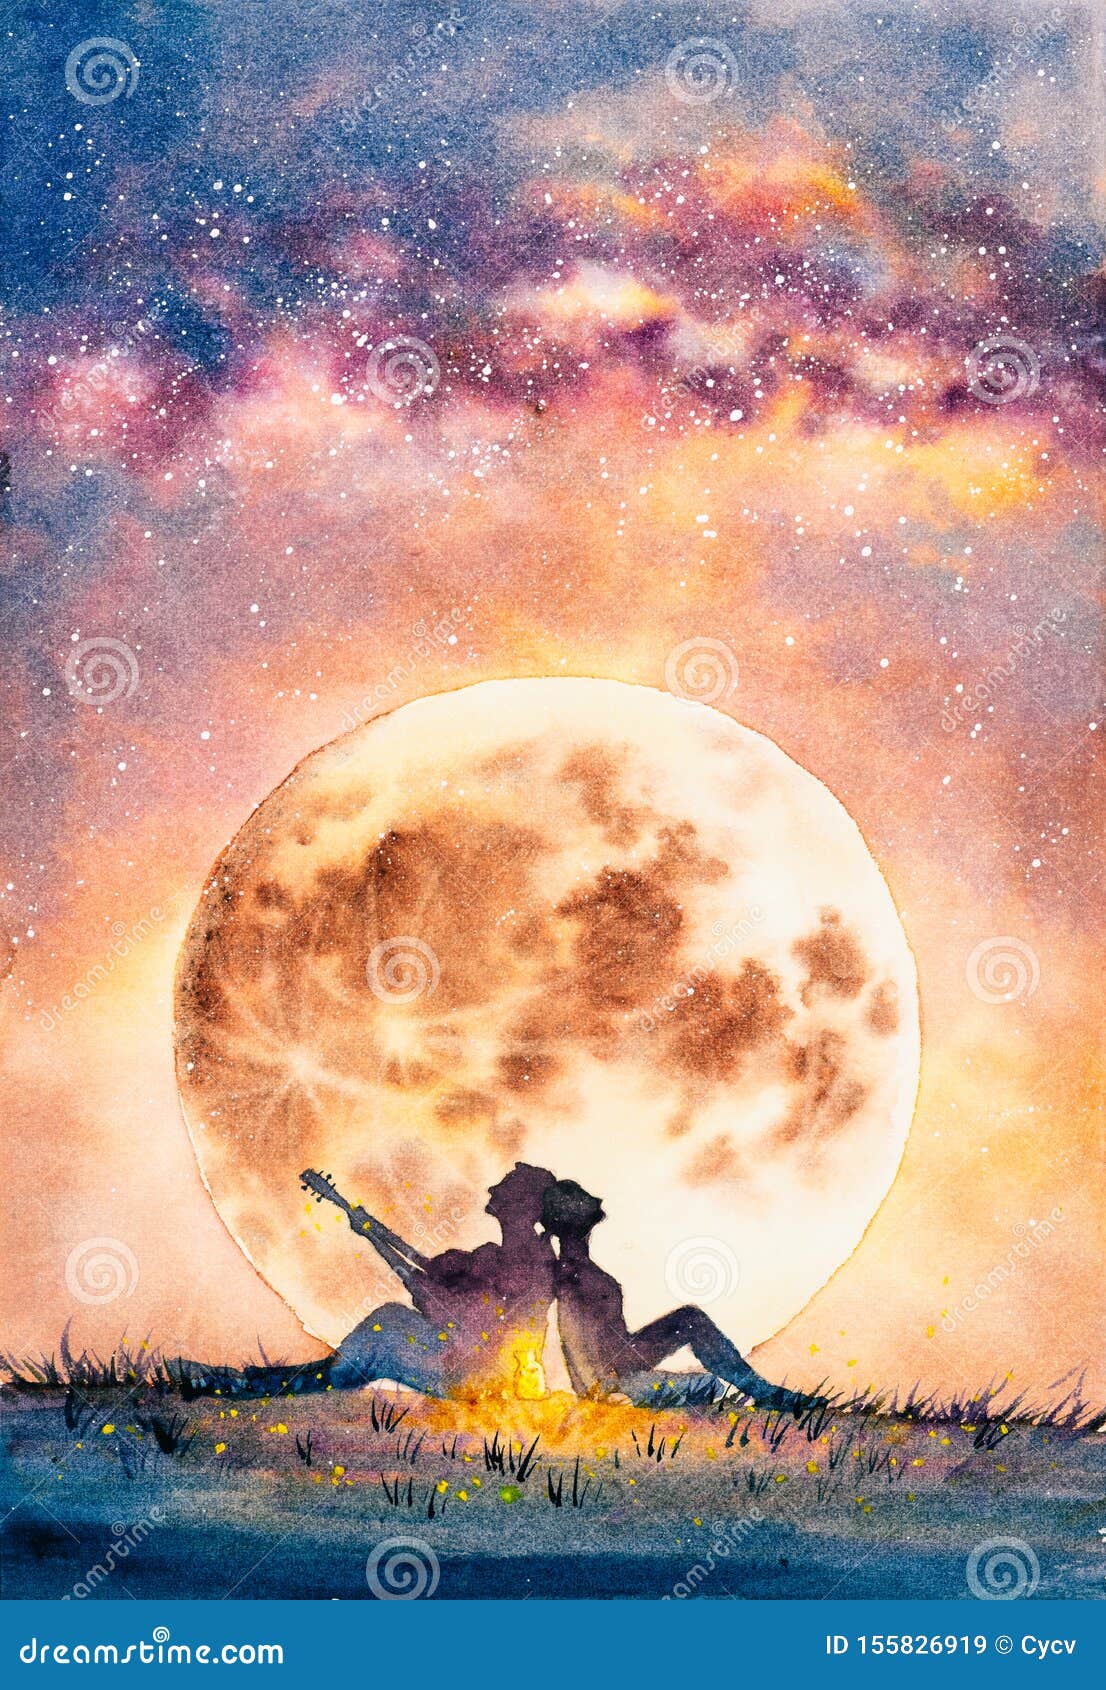 watercolor painting - young man delivers his affection to a fantastic one guitar under moon night